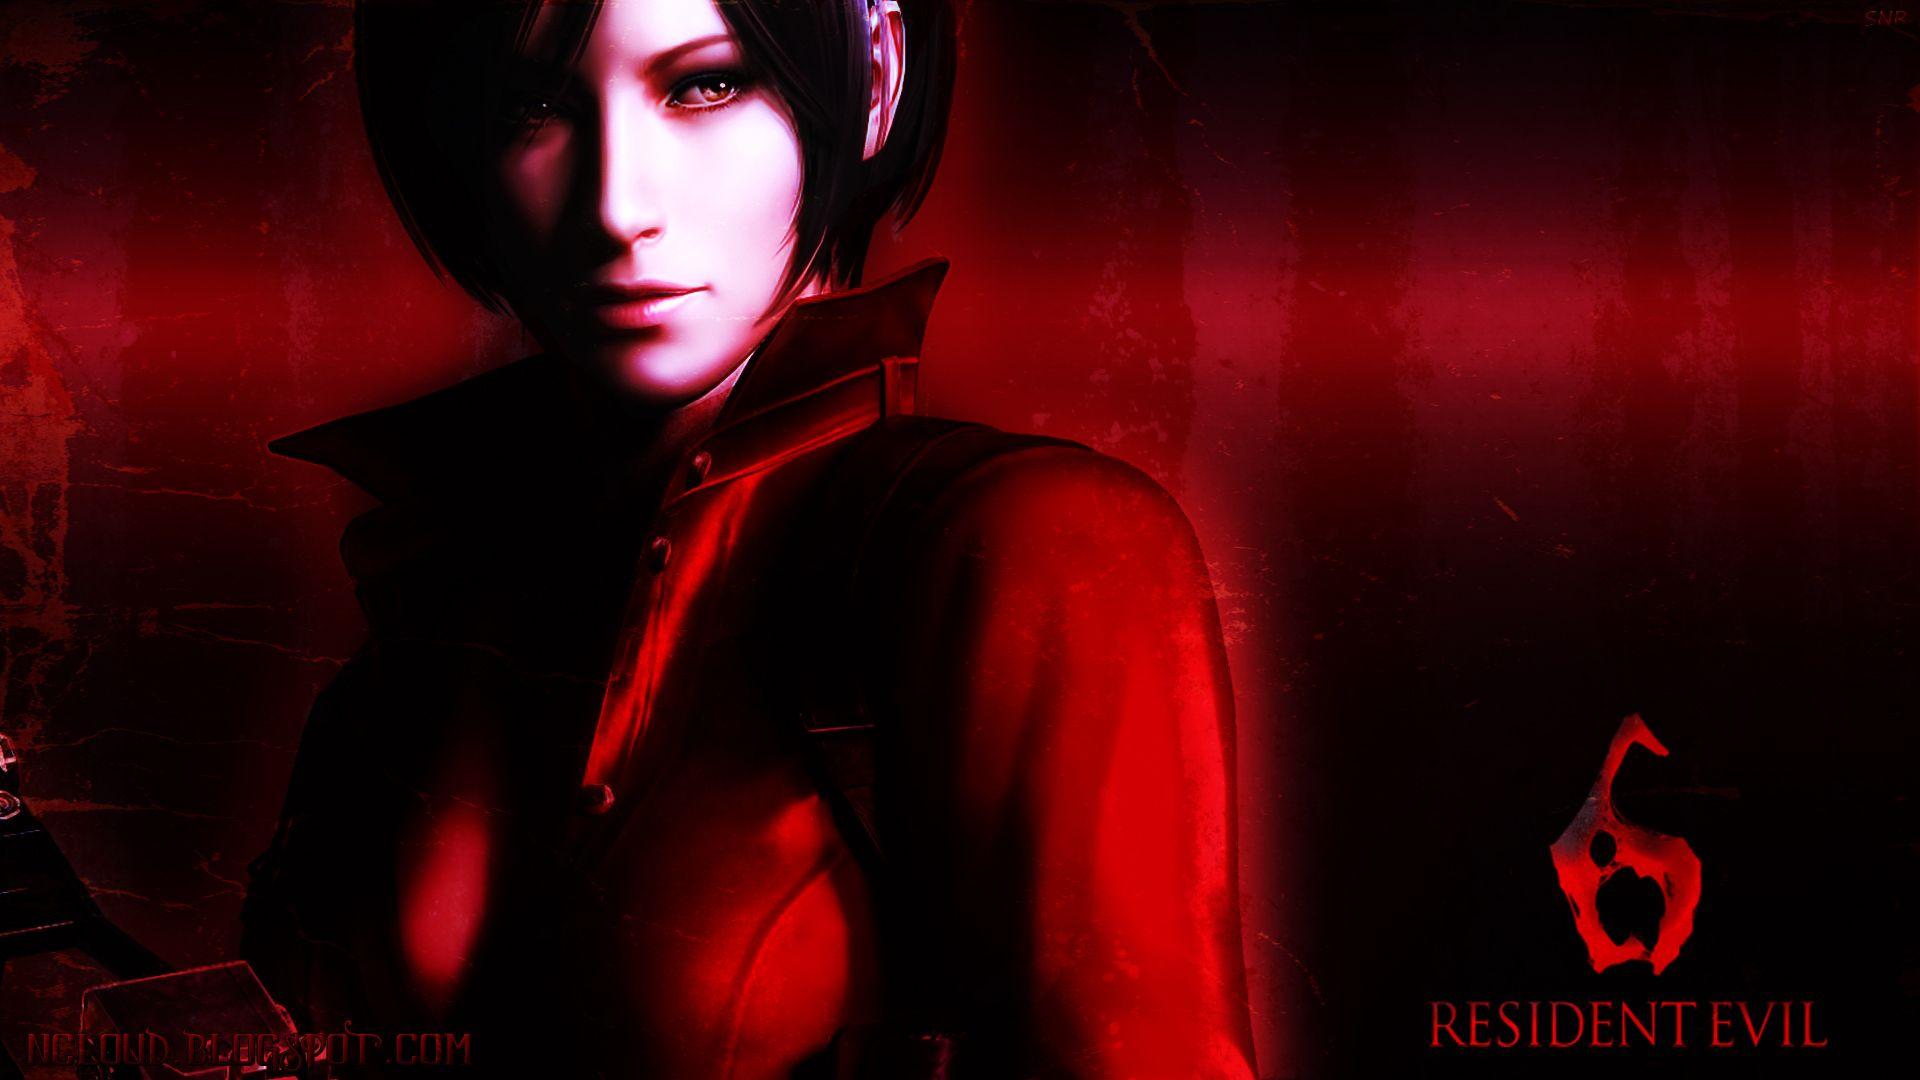 Games Movies Music Anime: My Resident Evil 6 Ada Wong Wallpaper 2